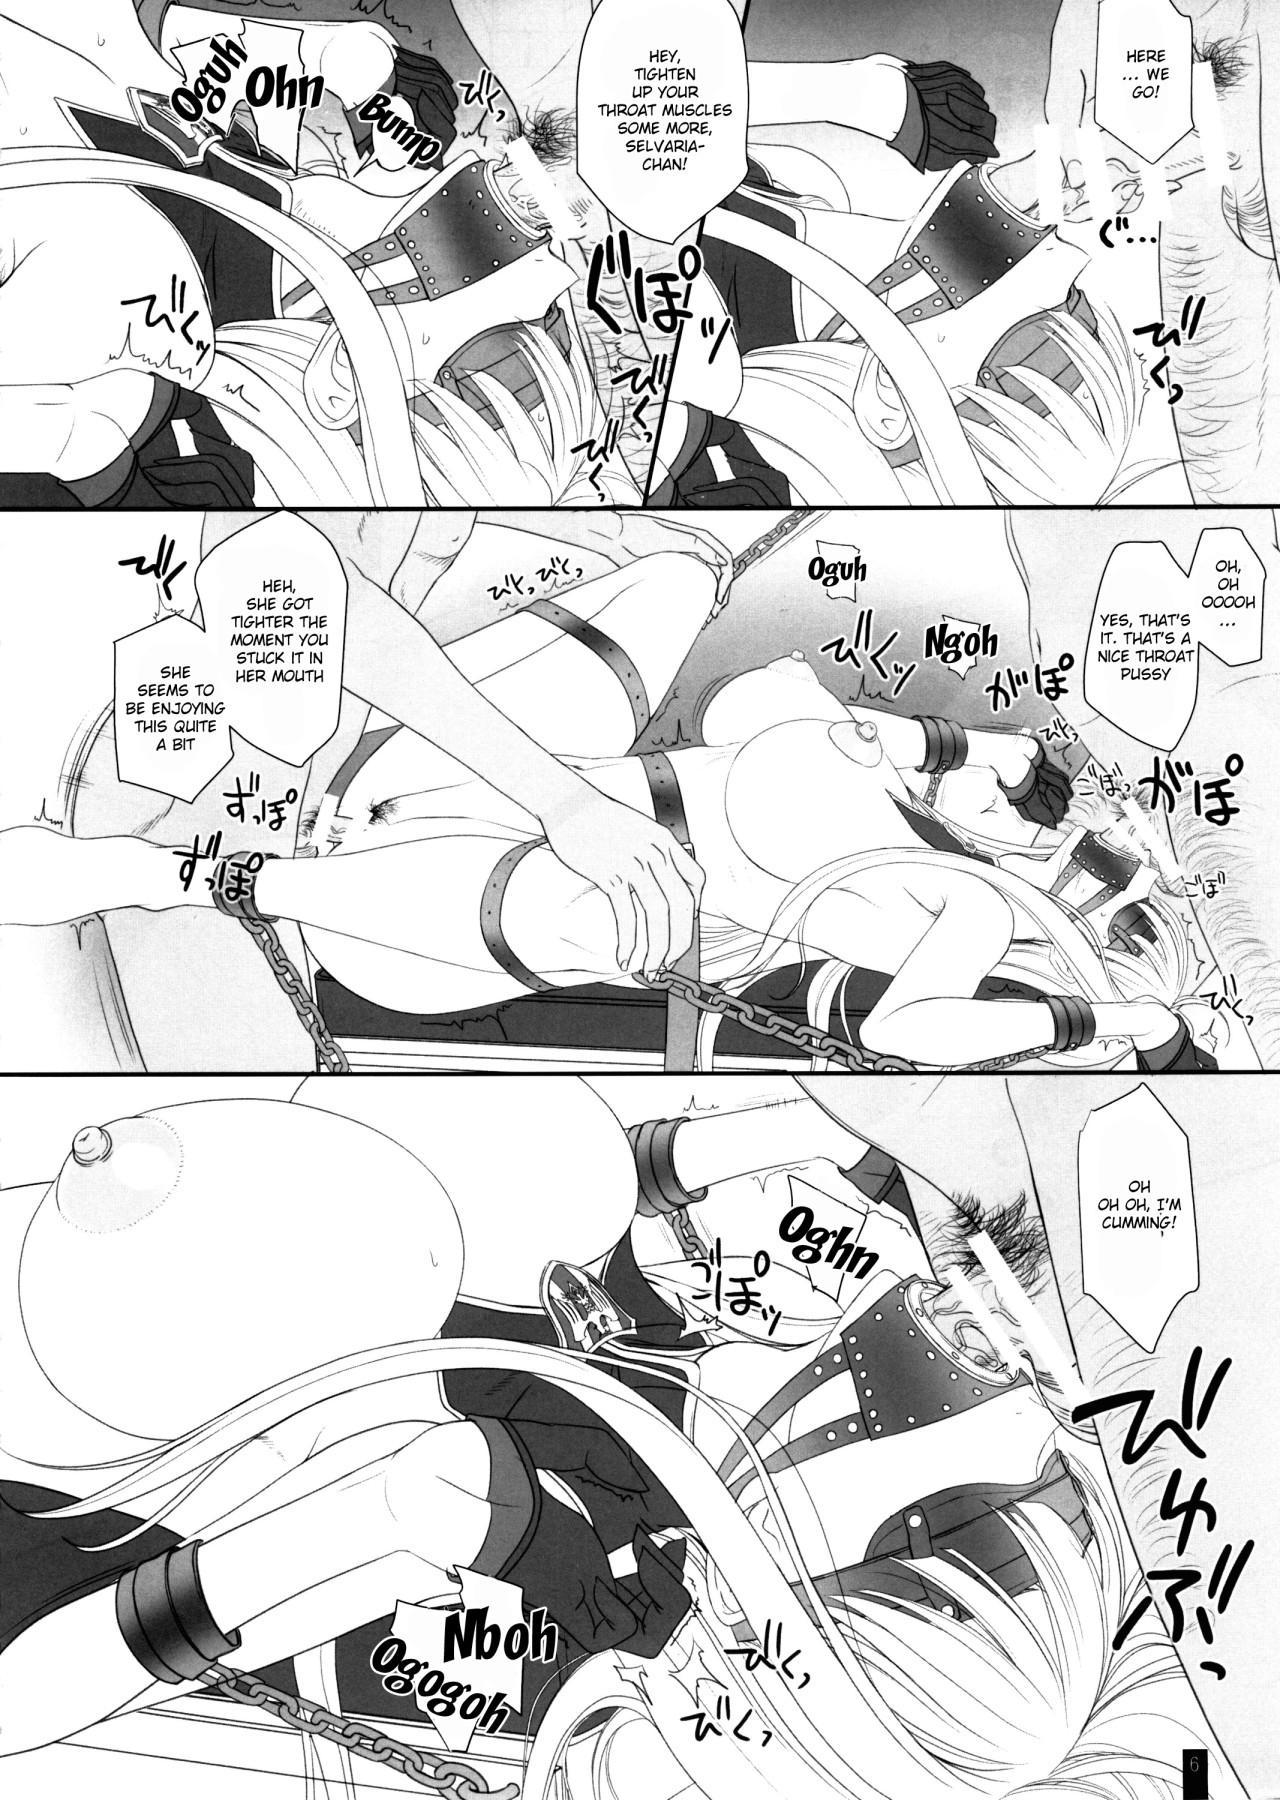 Office Sex CAPITULATION 2 - Valkyria chronicles Petite Teen - Page 4